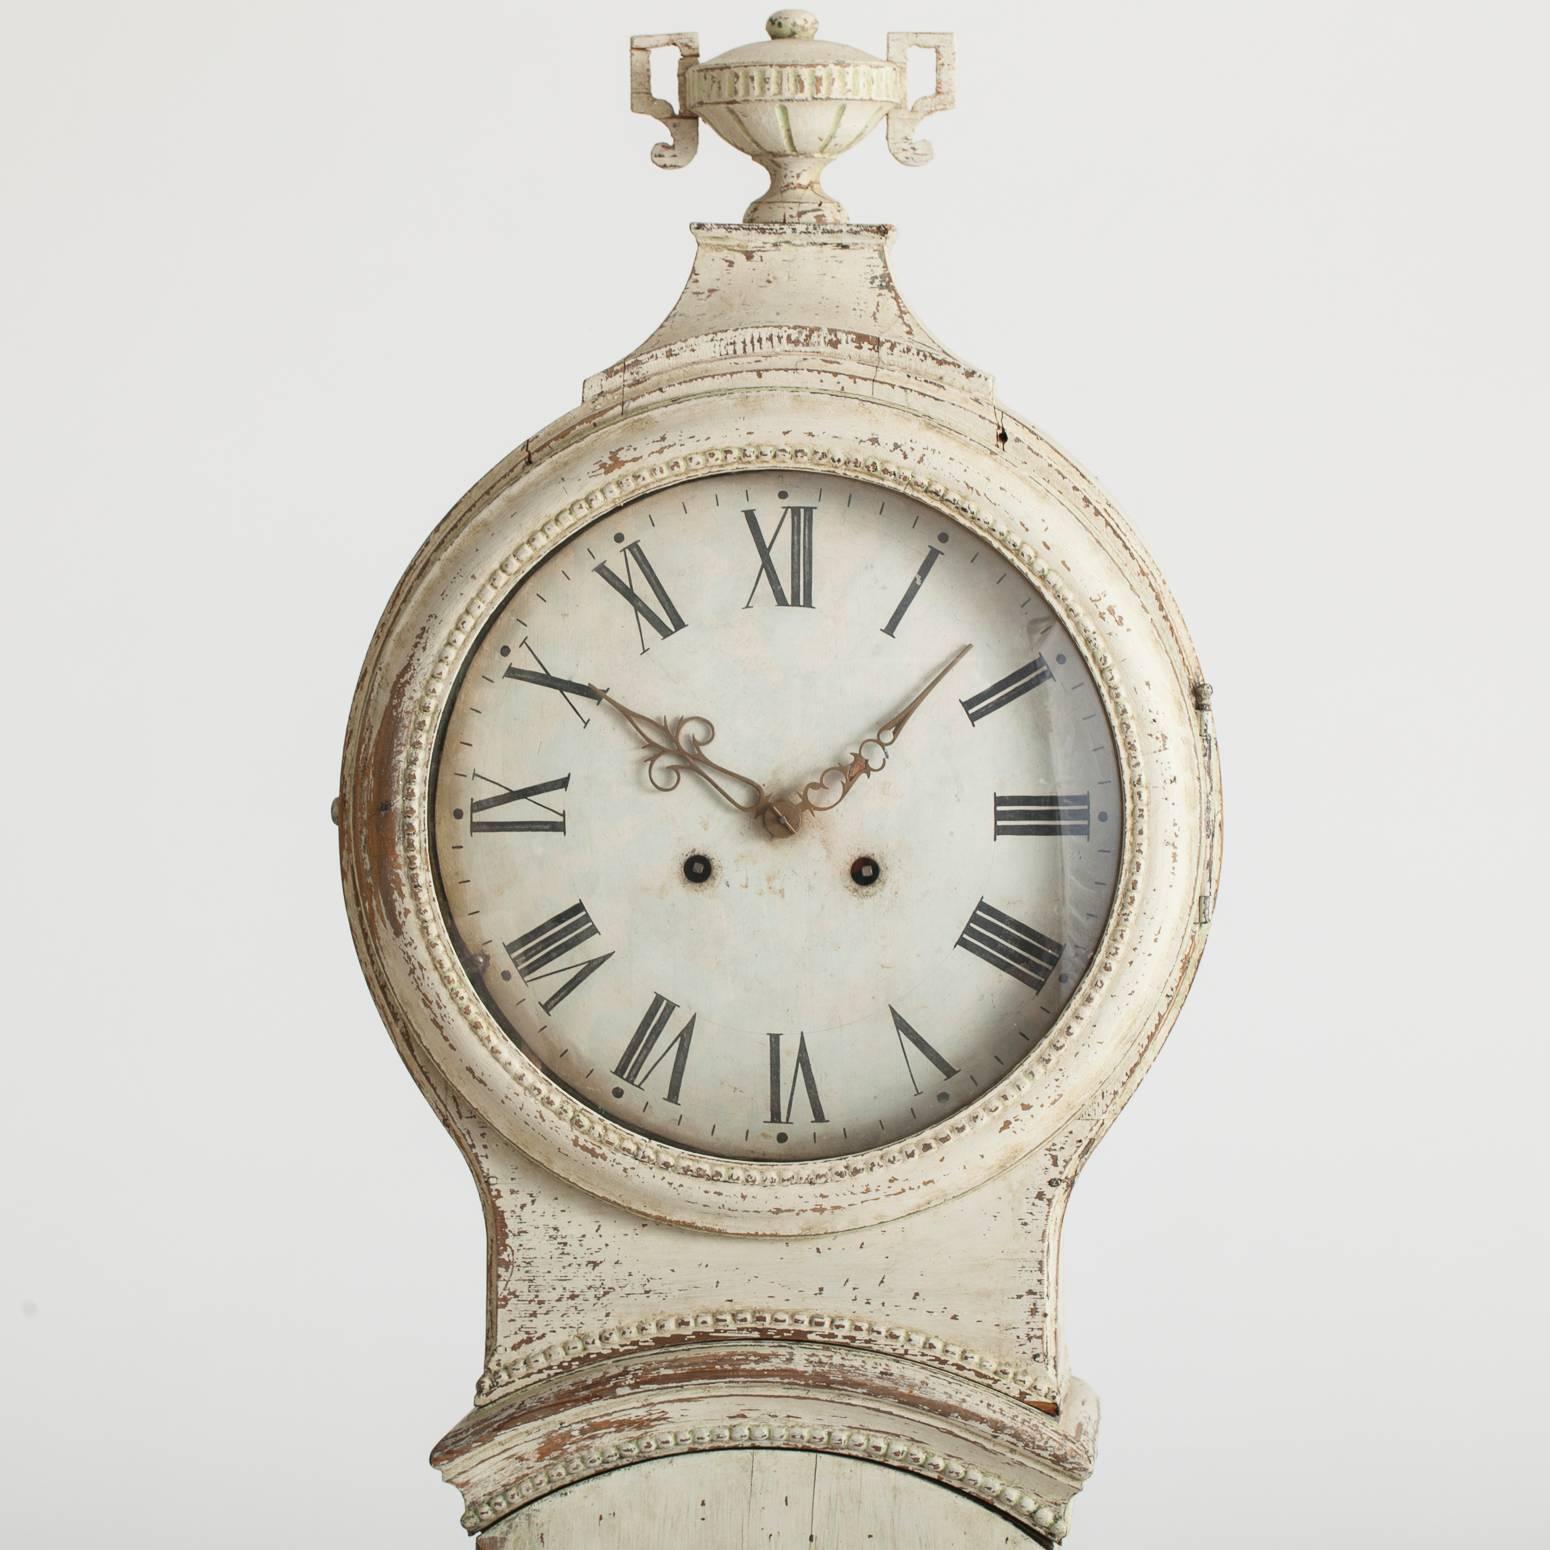 At 80 inches high this charming clock is great for a house with a low ceiling, yet has all the elements one could hope for, lovely carvings and a Classic urn on the top. The face is surrounded by delicate beaded molding, and the traces of white